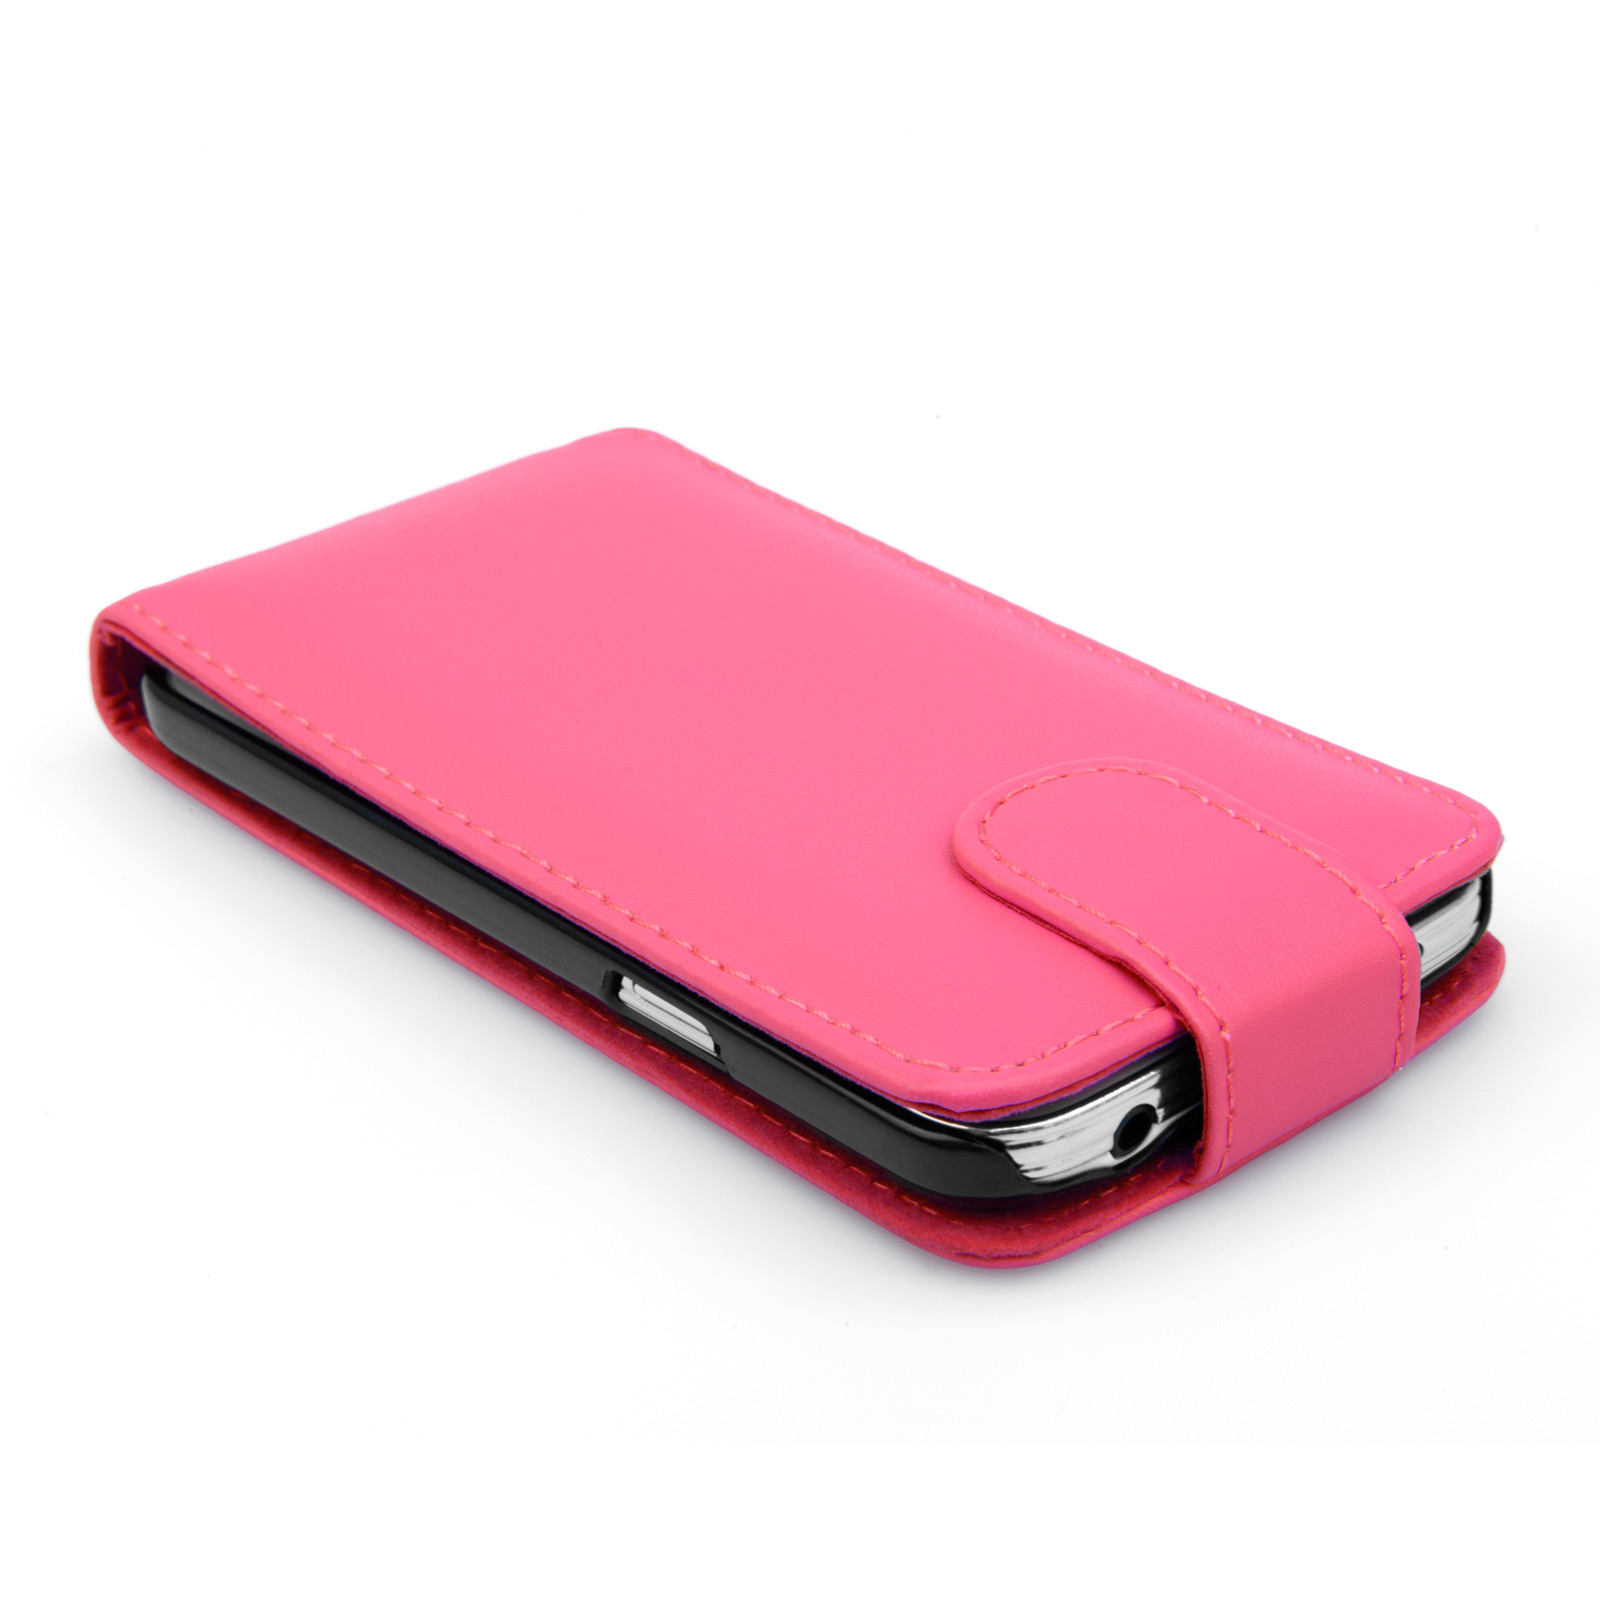 YouSave Samsung Galaxy S5 Mini Leather-Effect Flip Case - Hot Pink